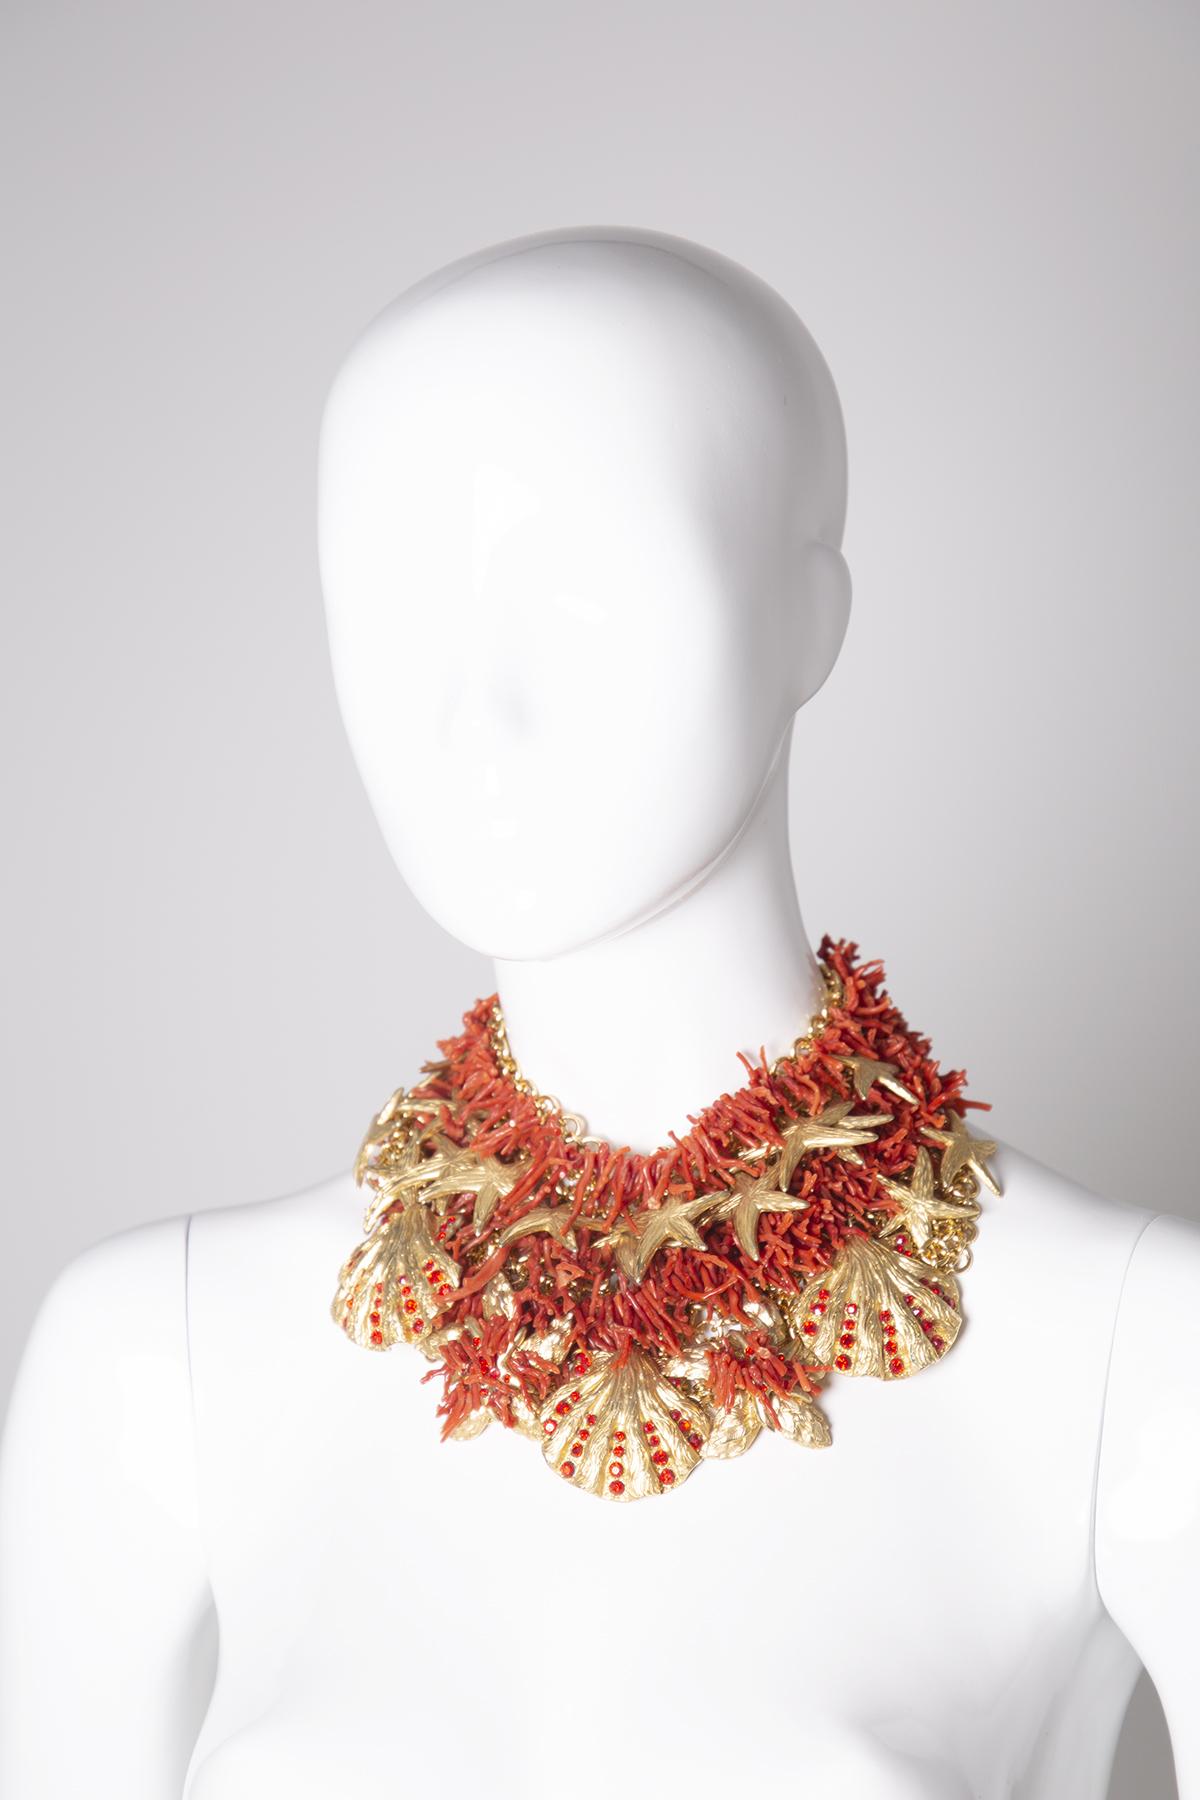 Majestic necklace designed by Ugo Correani for the Gianni Versace brand, Capri series from 1980s.
The necklace is made with a gold metal necklace. The necklace is embellished with coral elements that surround the whole necklace. What makes it